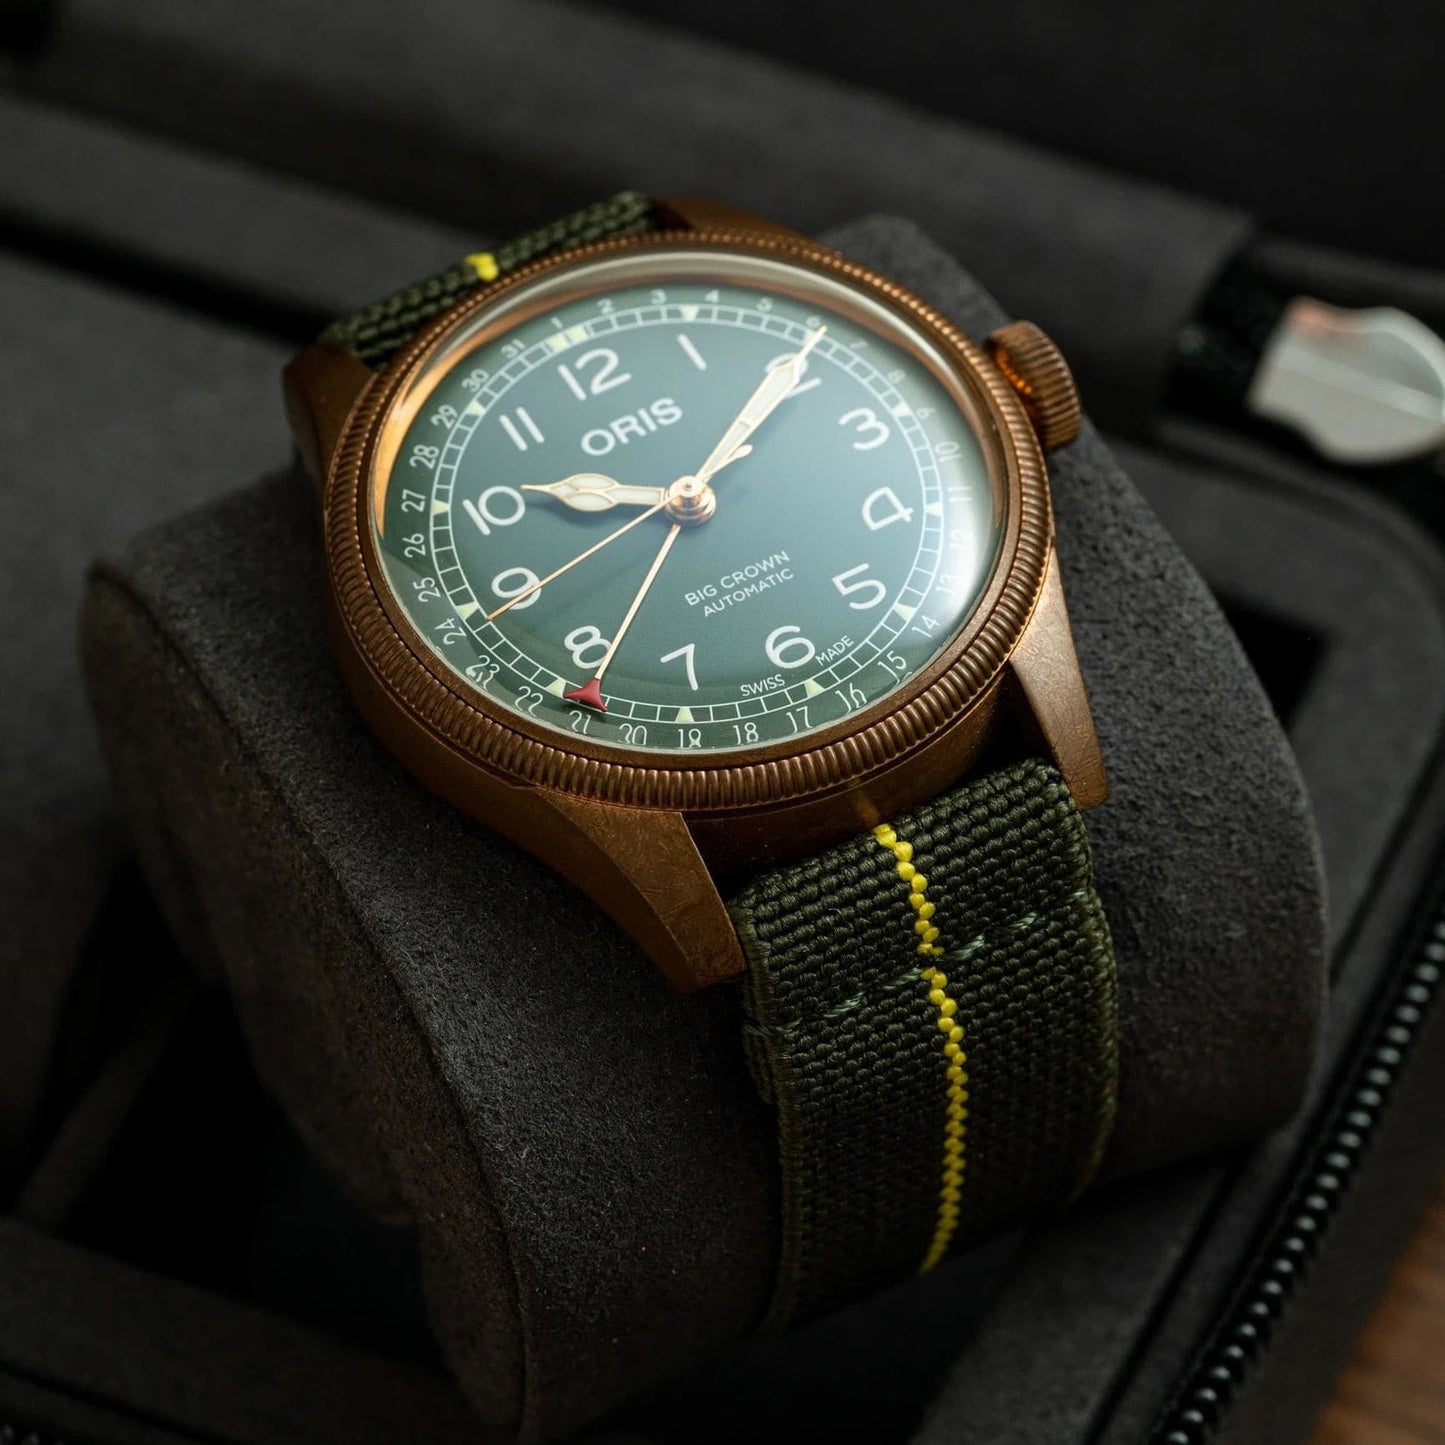 Elastic Loop Green/Yellow by  Delugs Straps |  Time Keeper.